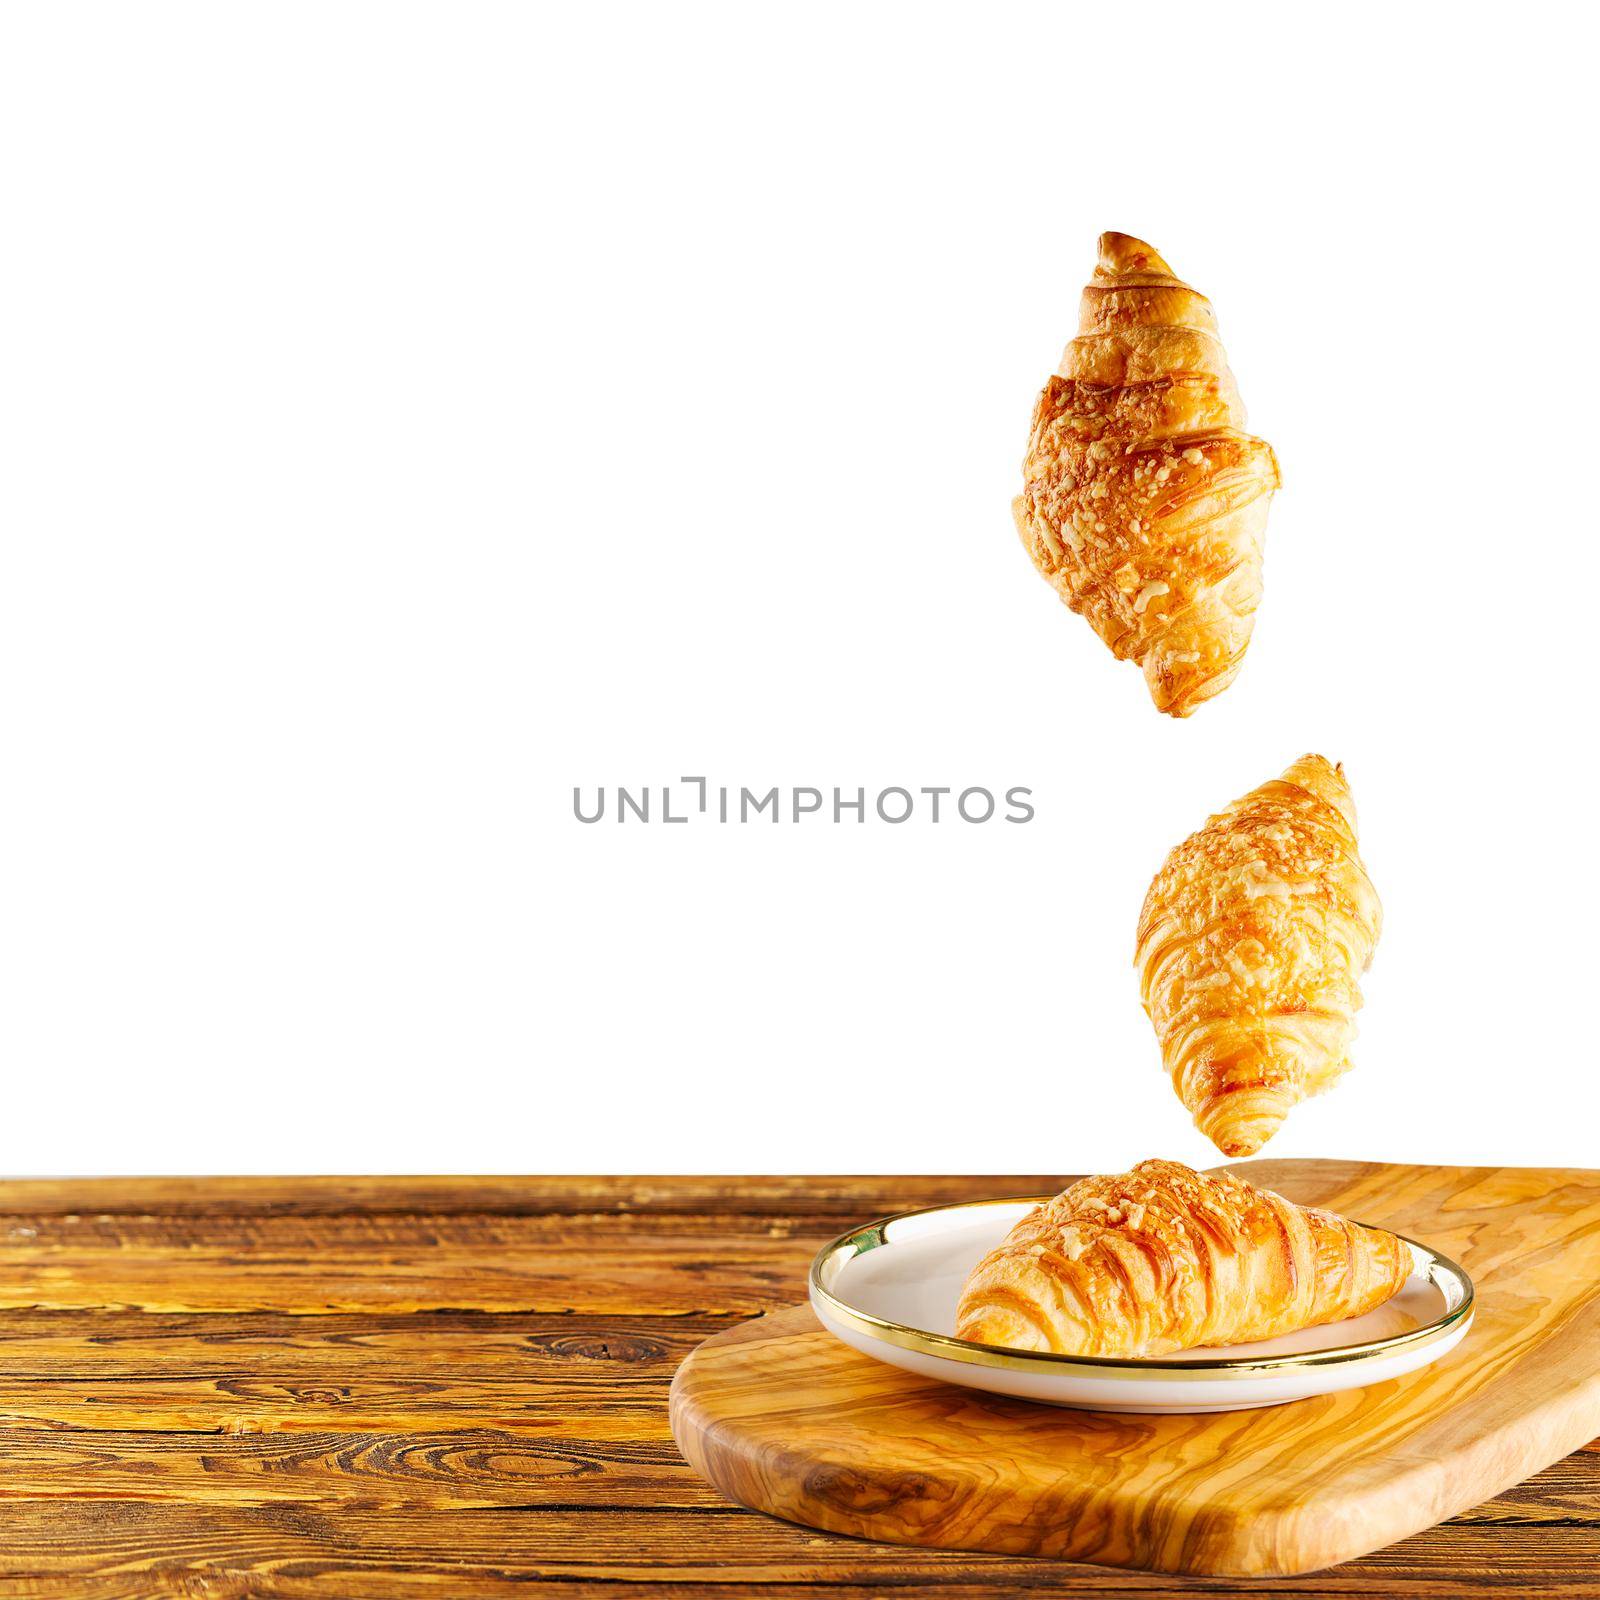 Falling fresh baked croissants with cheese. French pastry concept. Bakery pattern with baked croissant. copy space